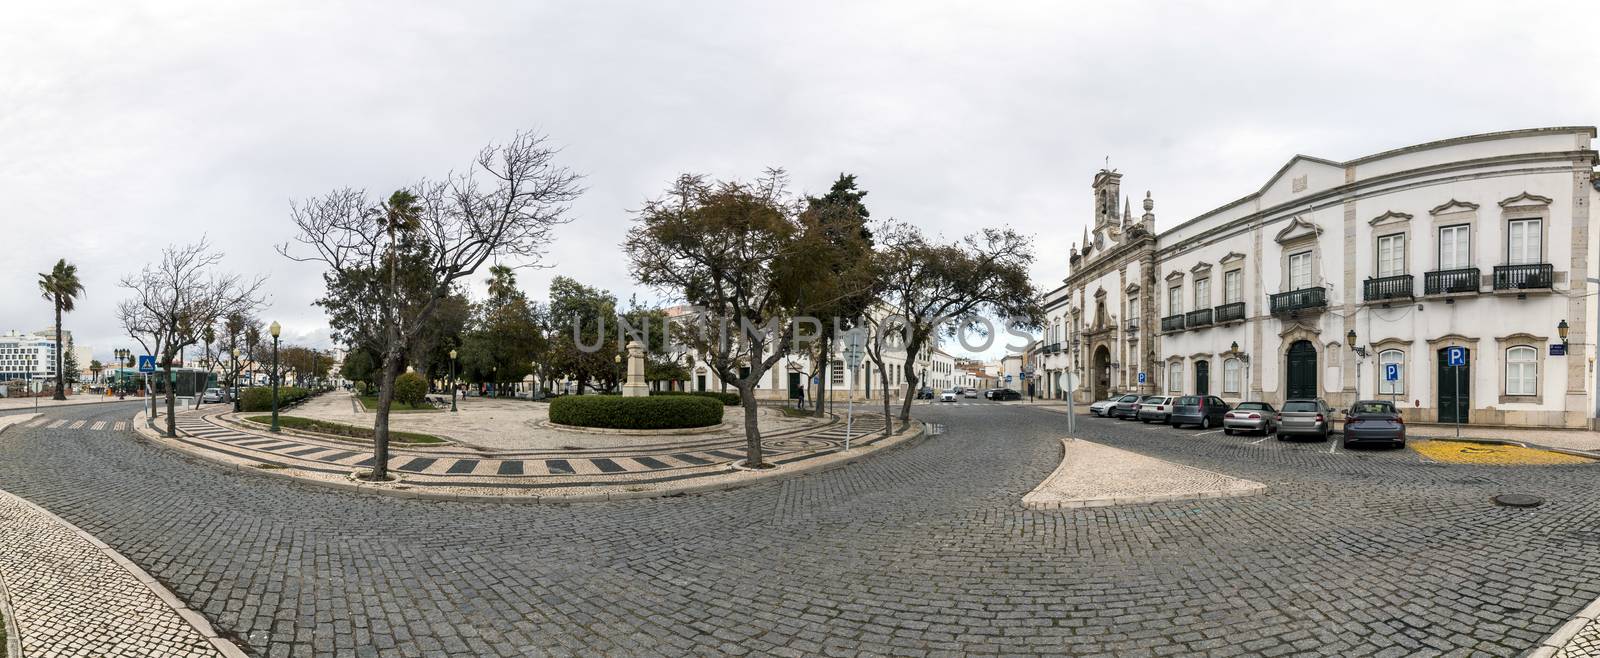 historical downtown panorama by membio